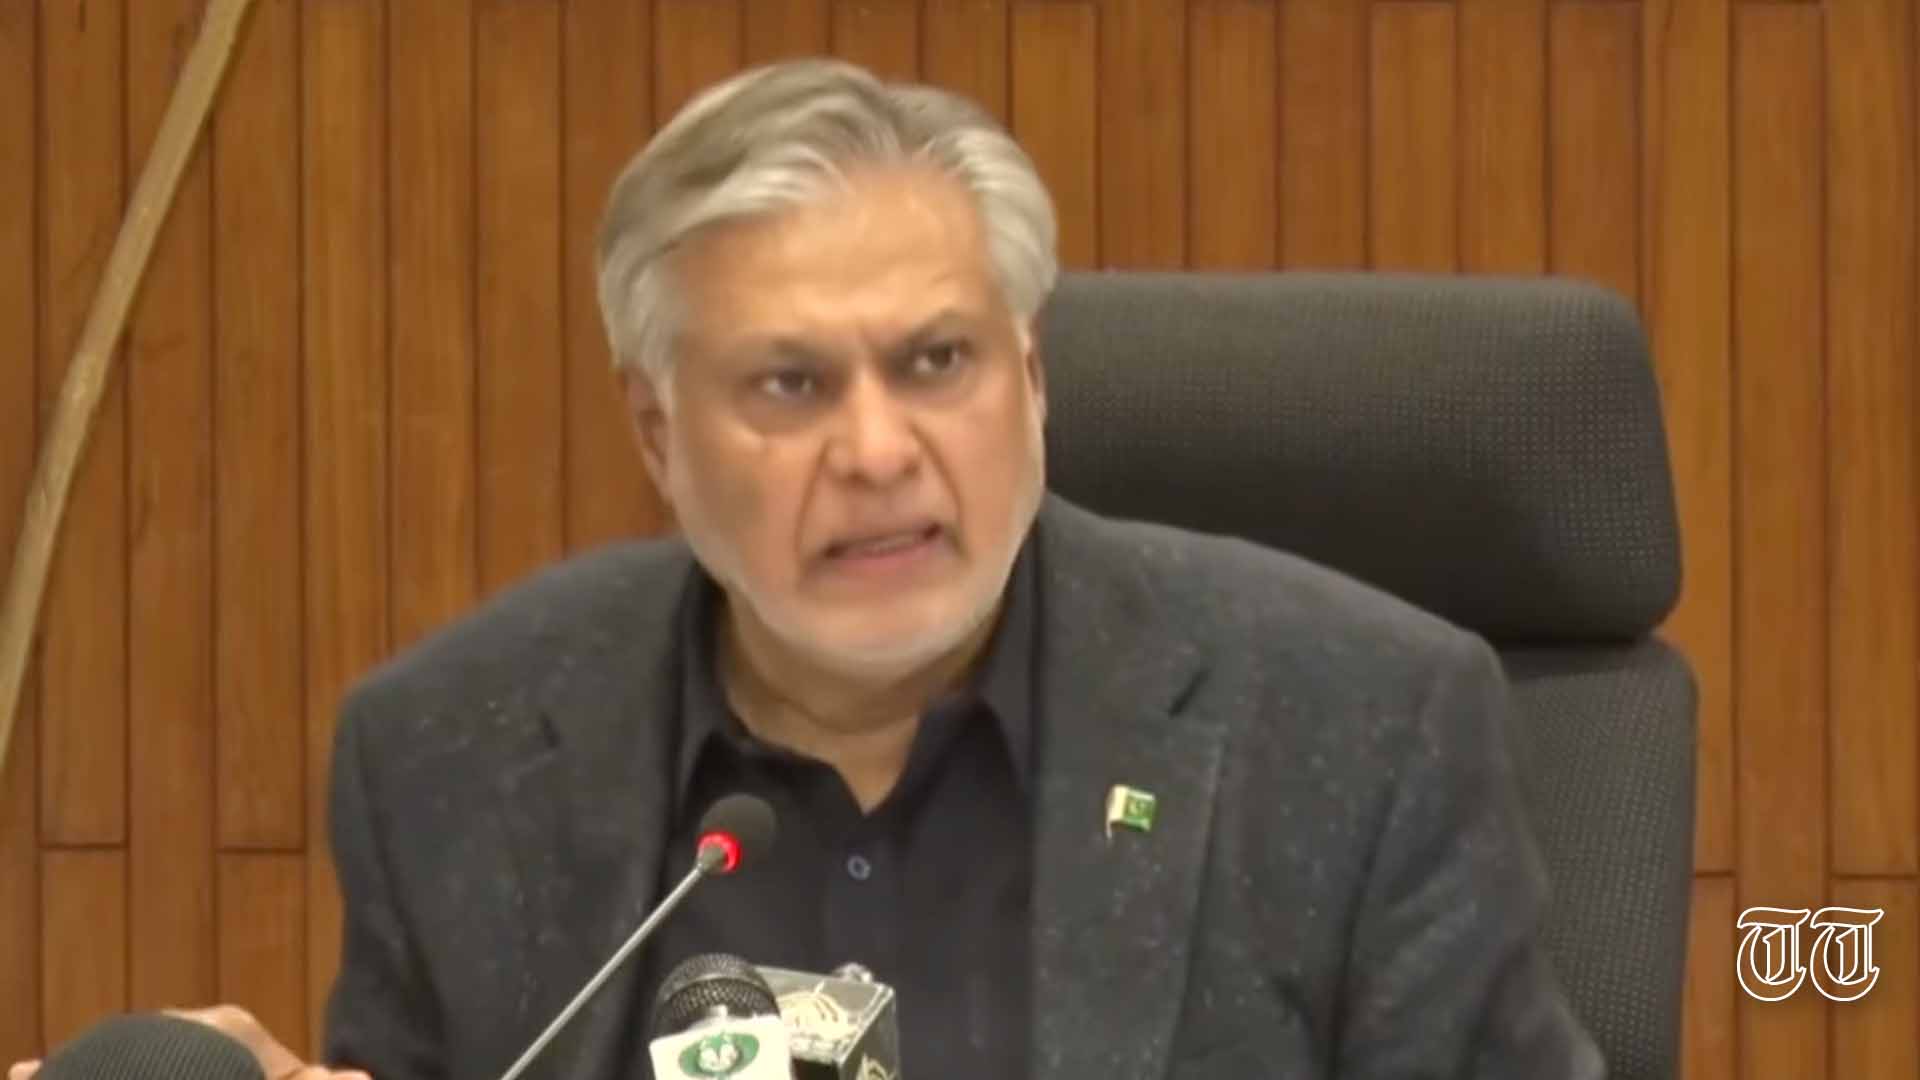 A file photo is shown of finance minister Ishaq Dar addressing a press conference.